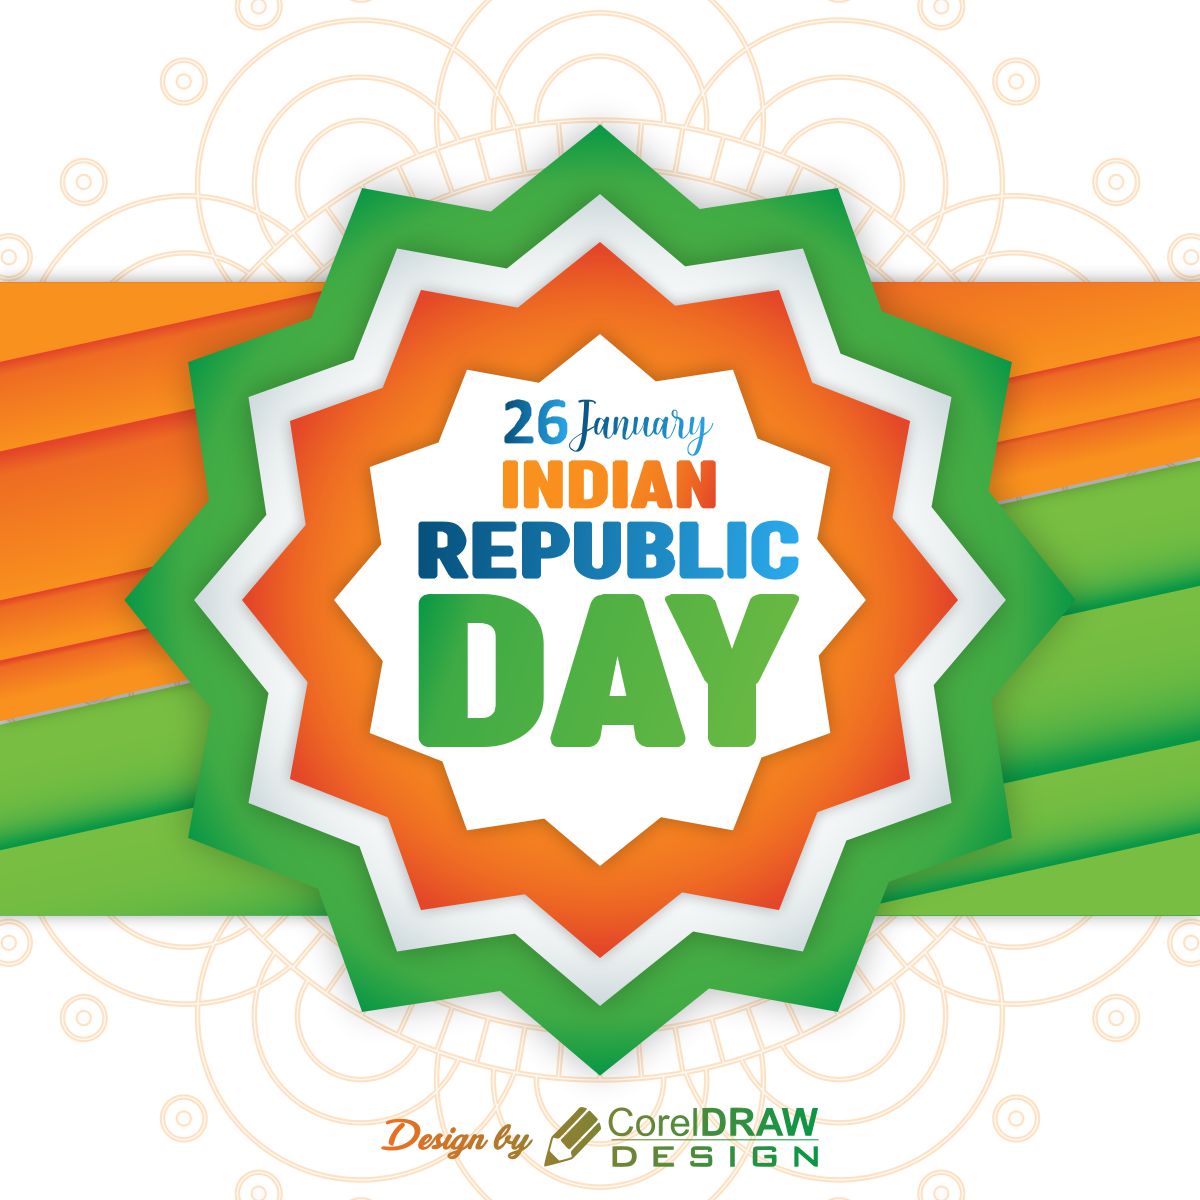 26 January Indian Republic Day poster design vector for free